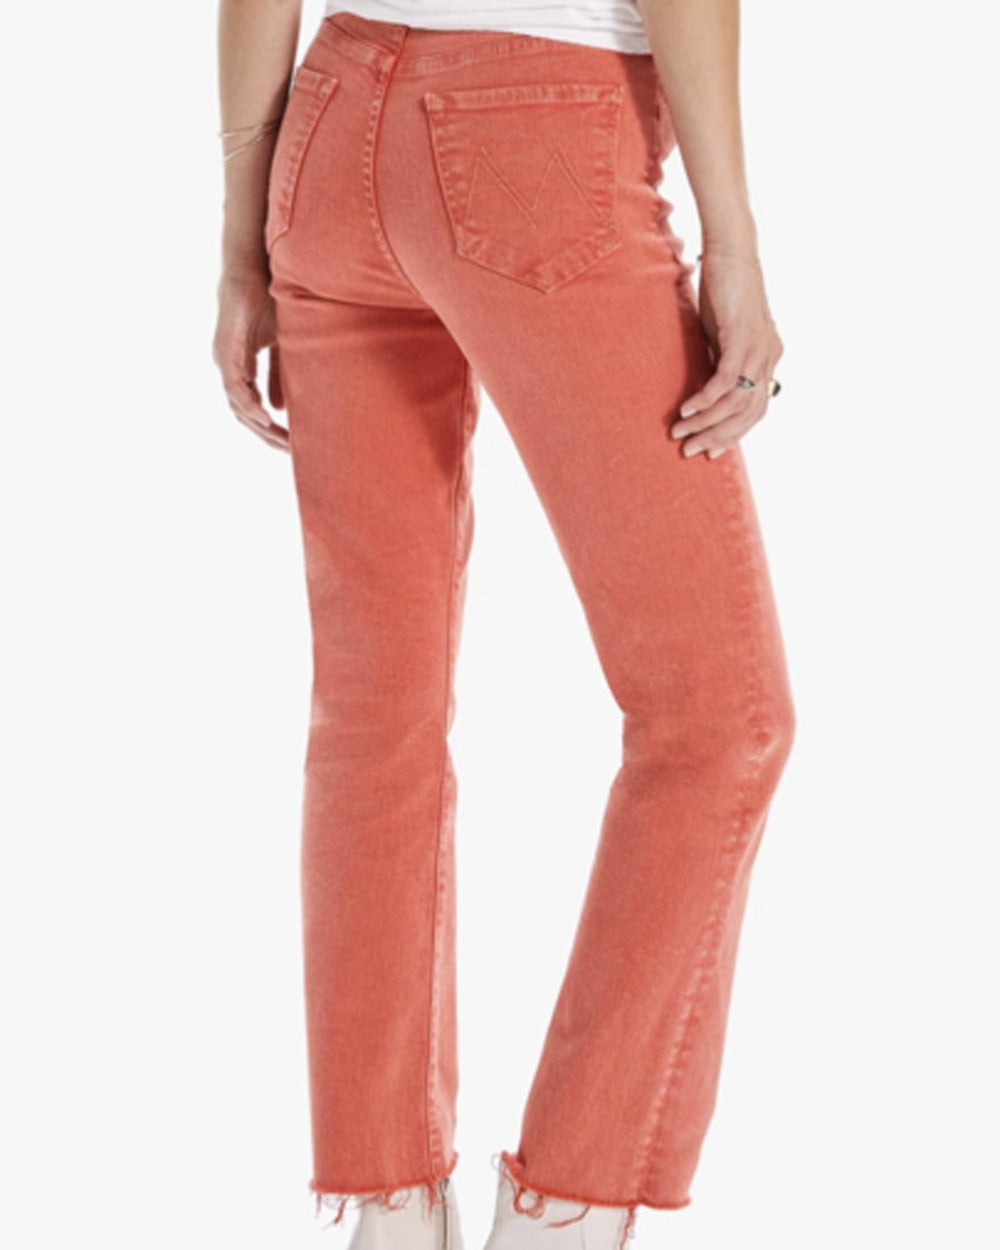 Swooner Rascal Ankle Fray Jean in Red